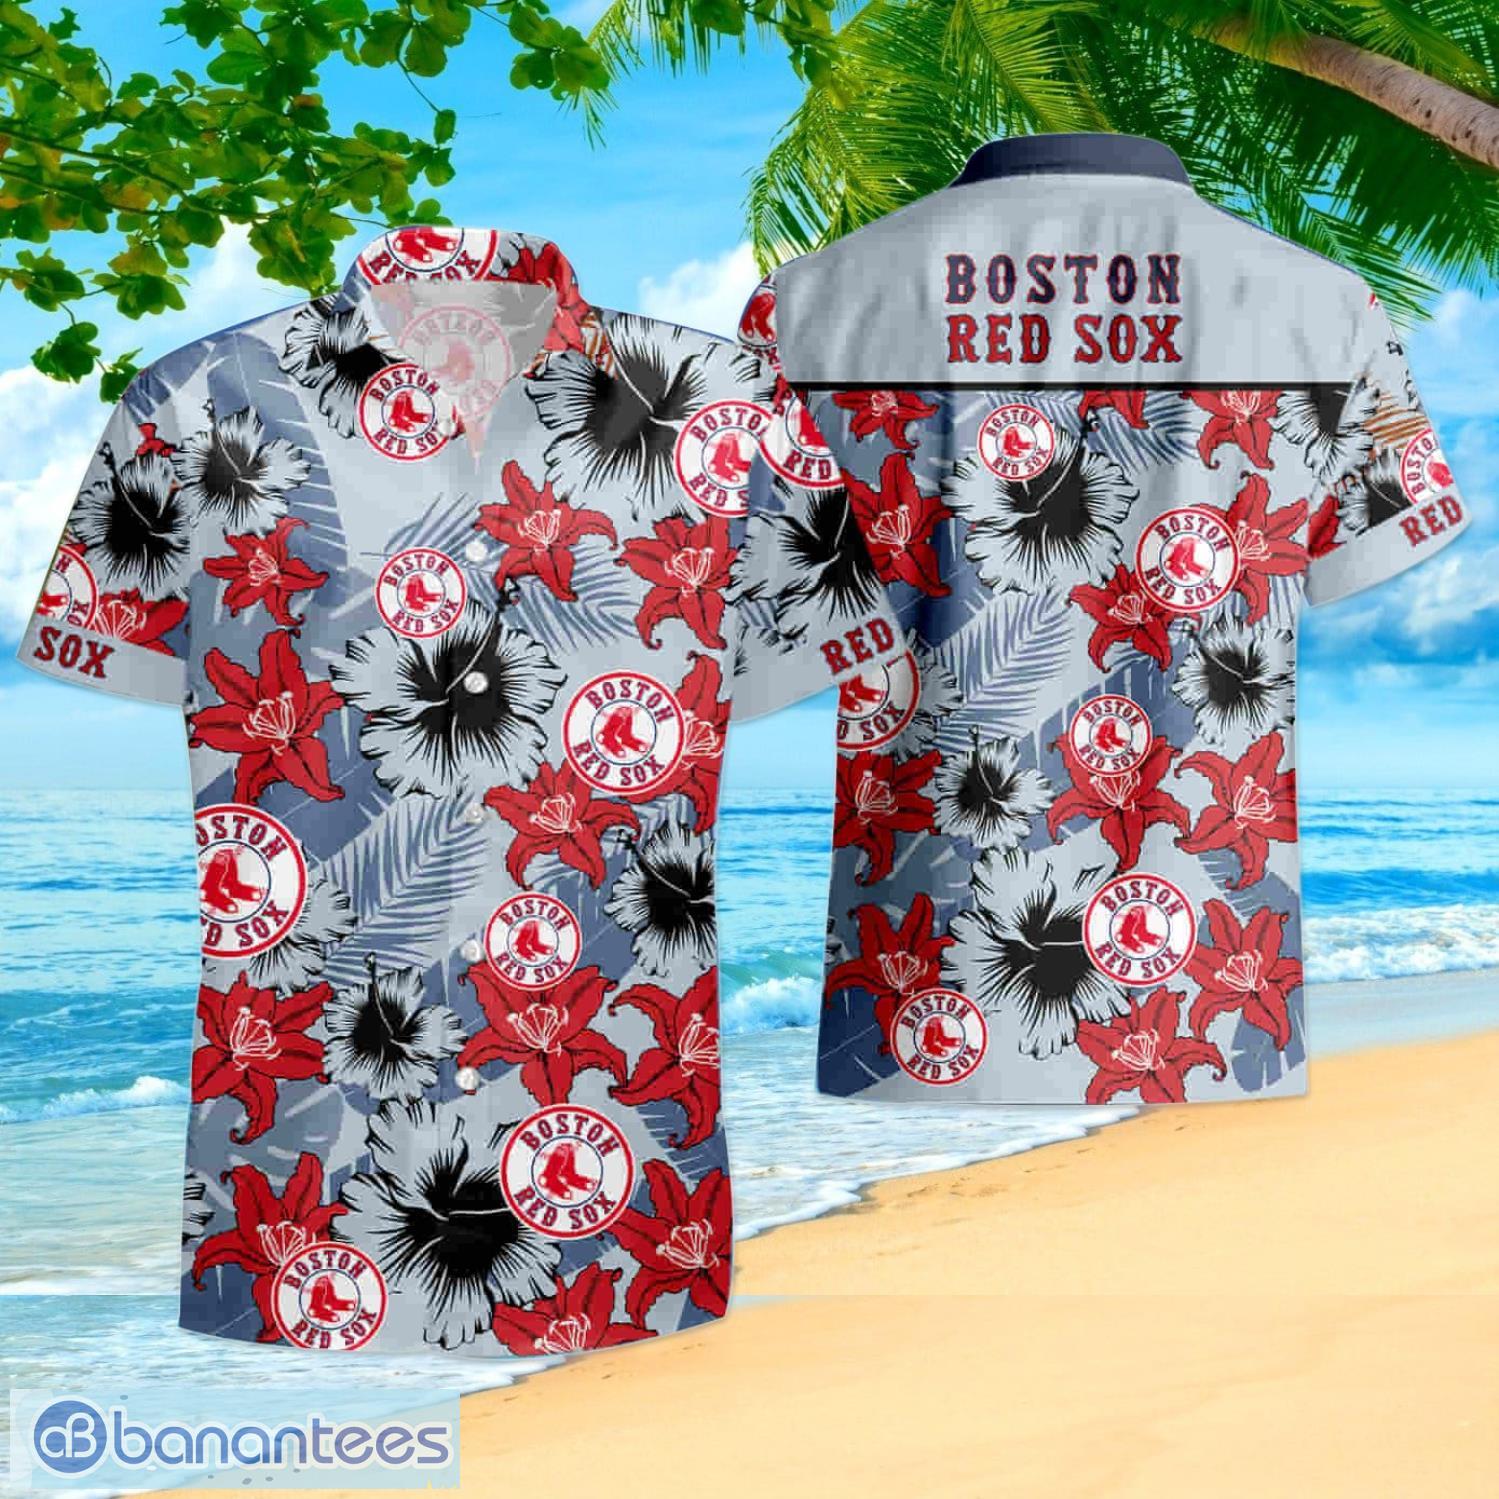 red sox 2 on sleeve